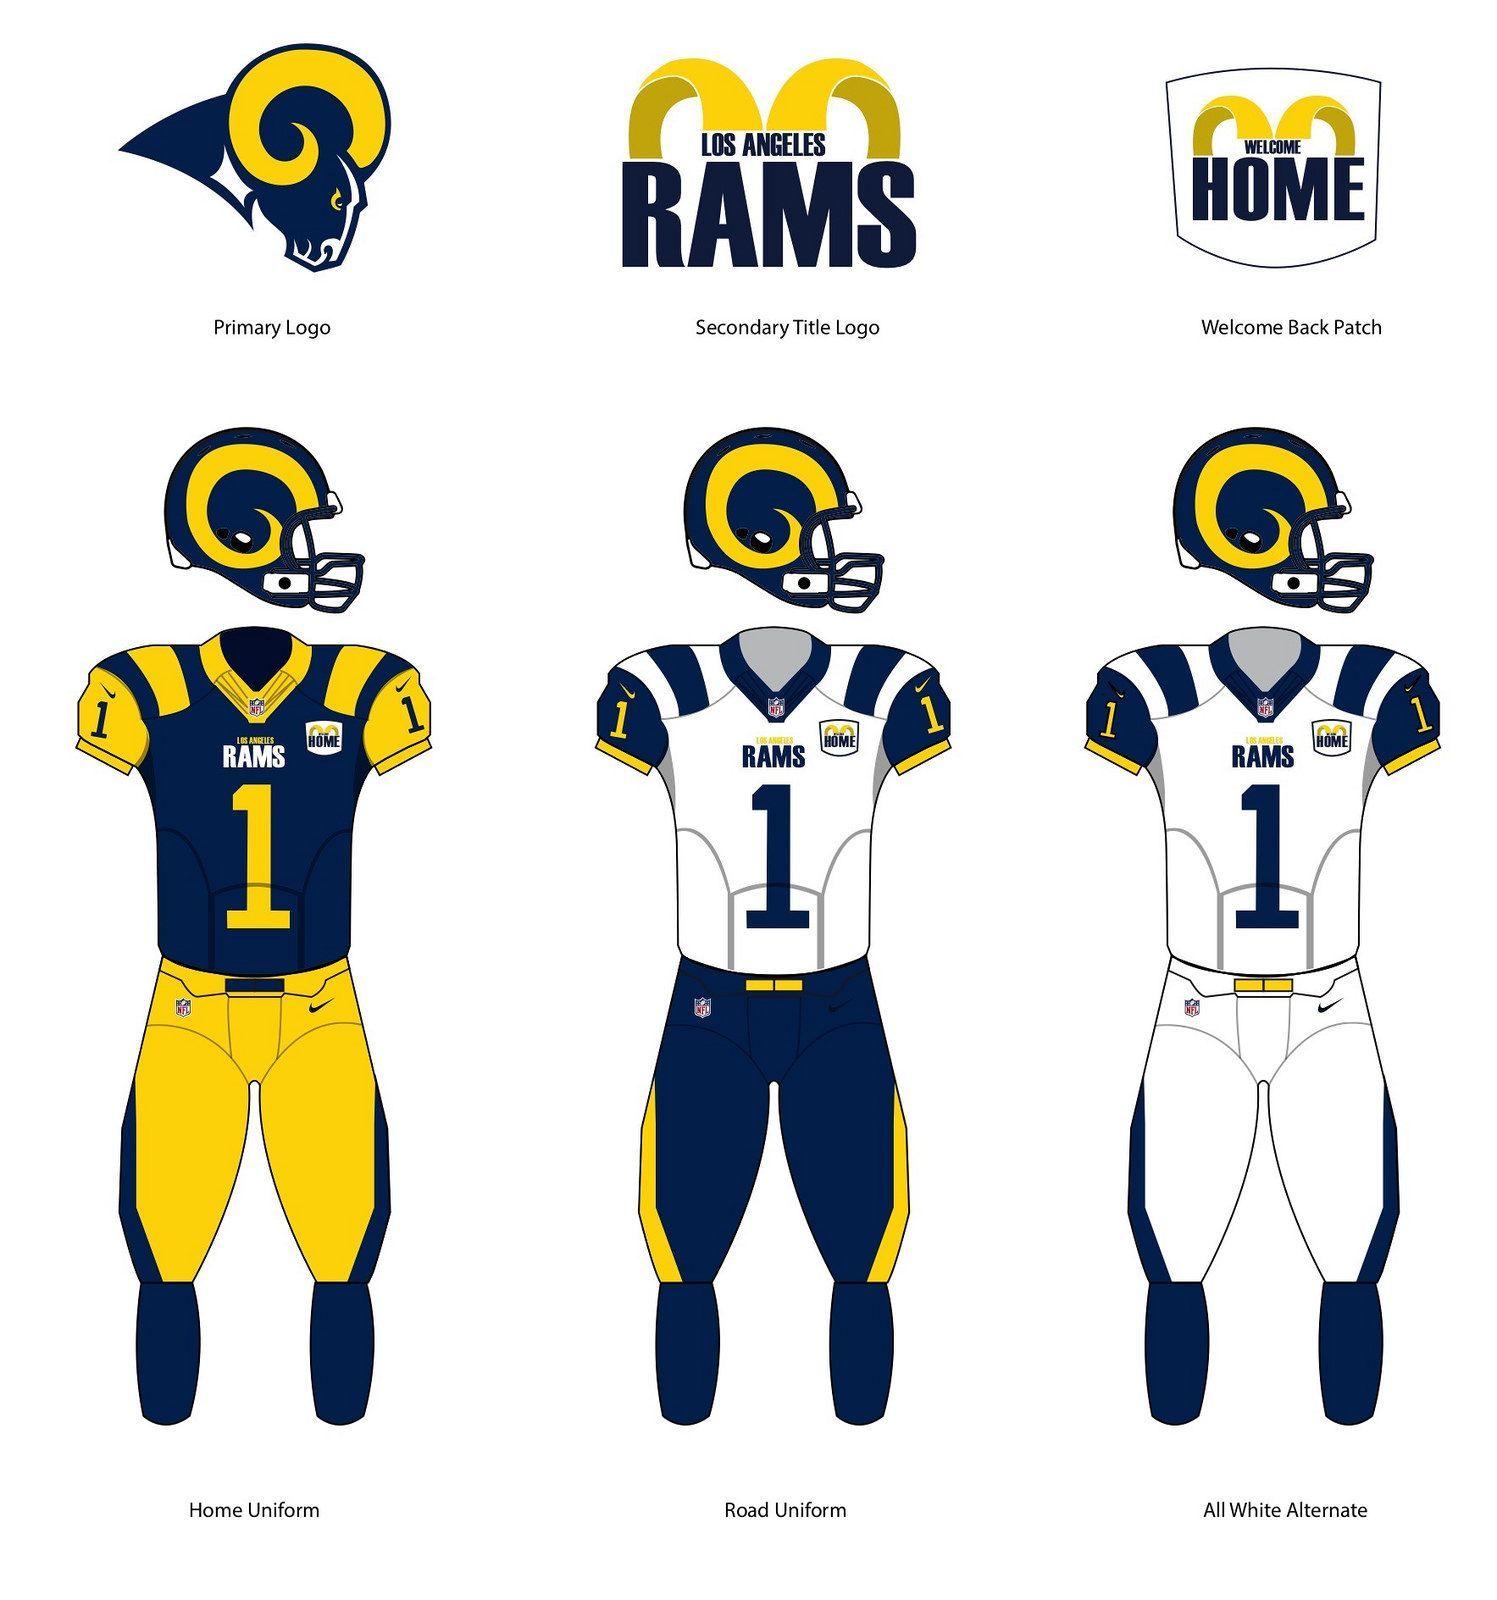 Uni Watch contest results - How you&;d redesign the Rams